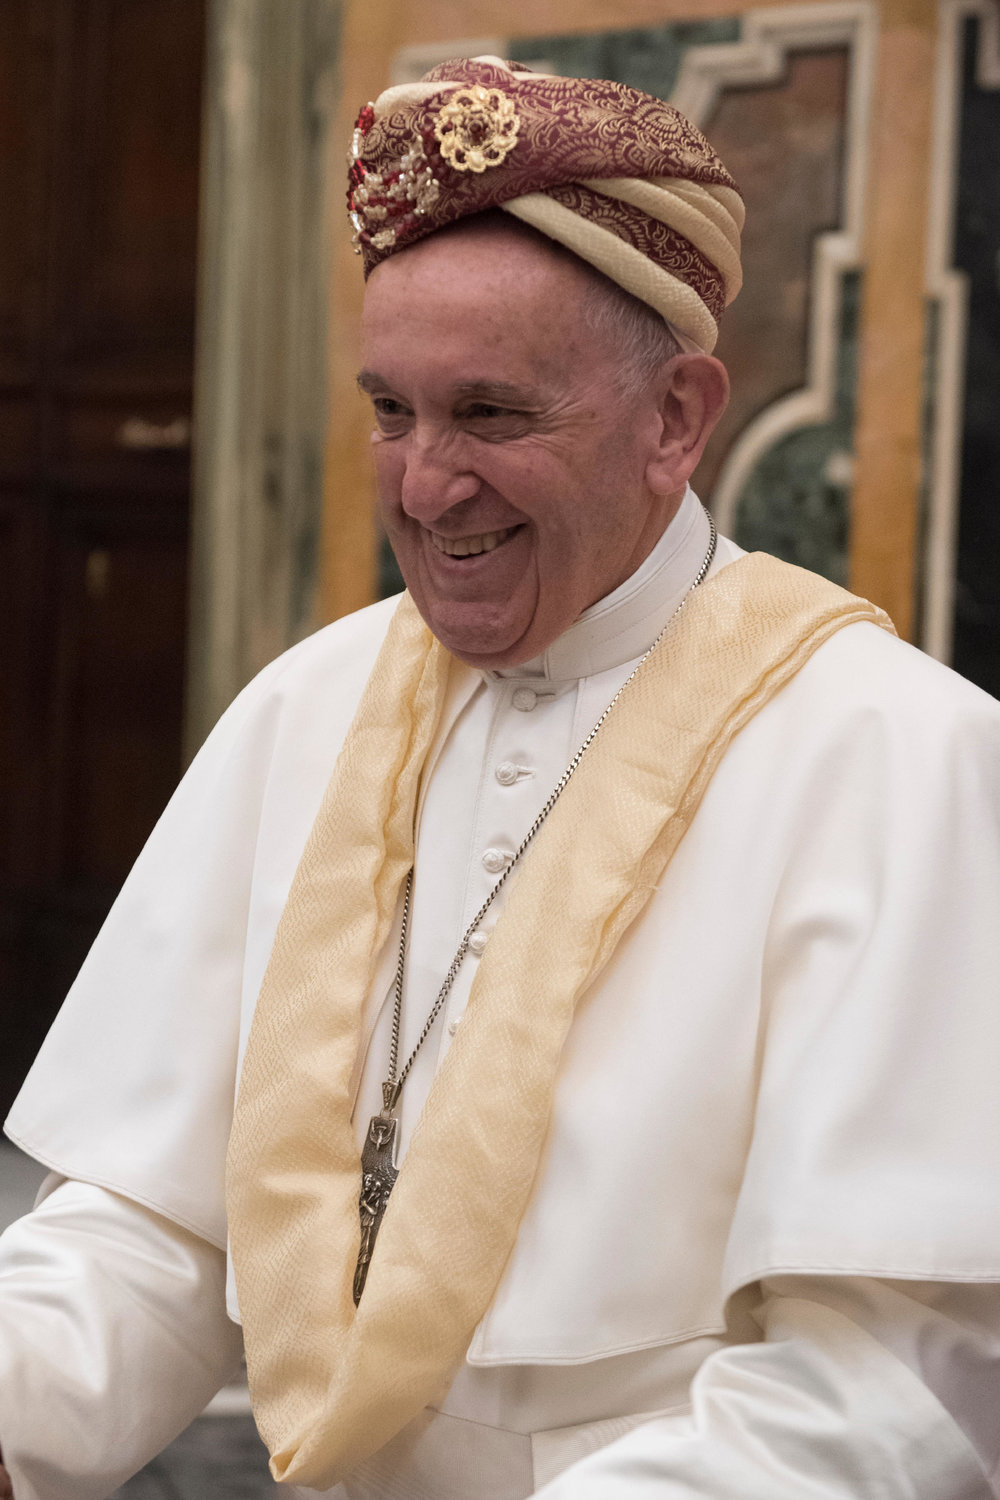 Pope Francis smiles while wearing a turban after it was presented to him during a meeting April 26, 2019, at the Vatican with members of the Catholic Biblical Federation celebrating their organization’s 50th anniversary.